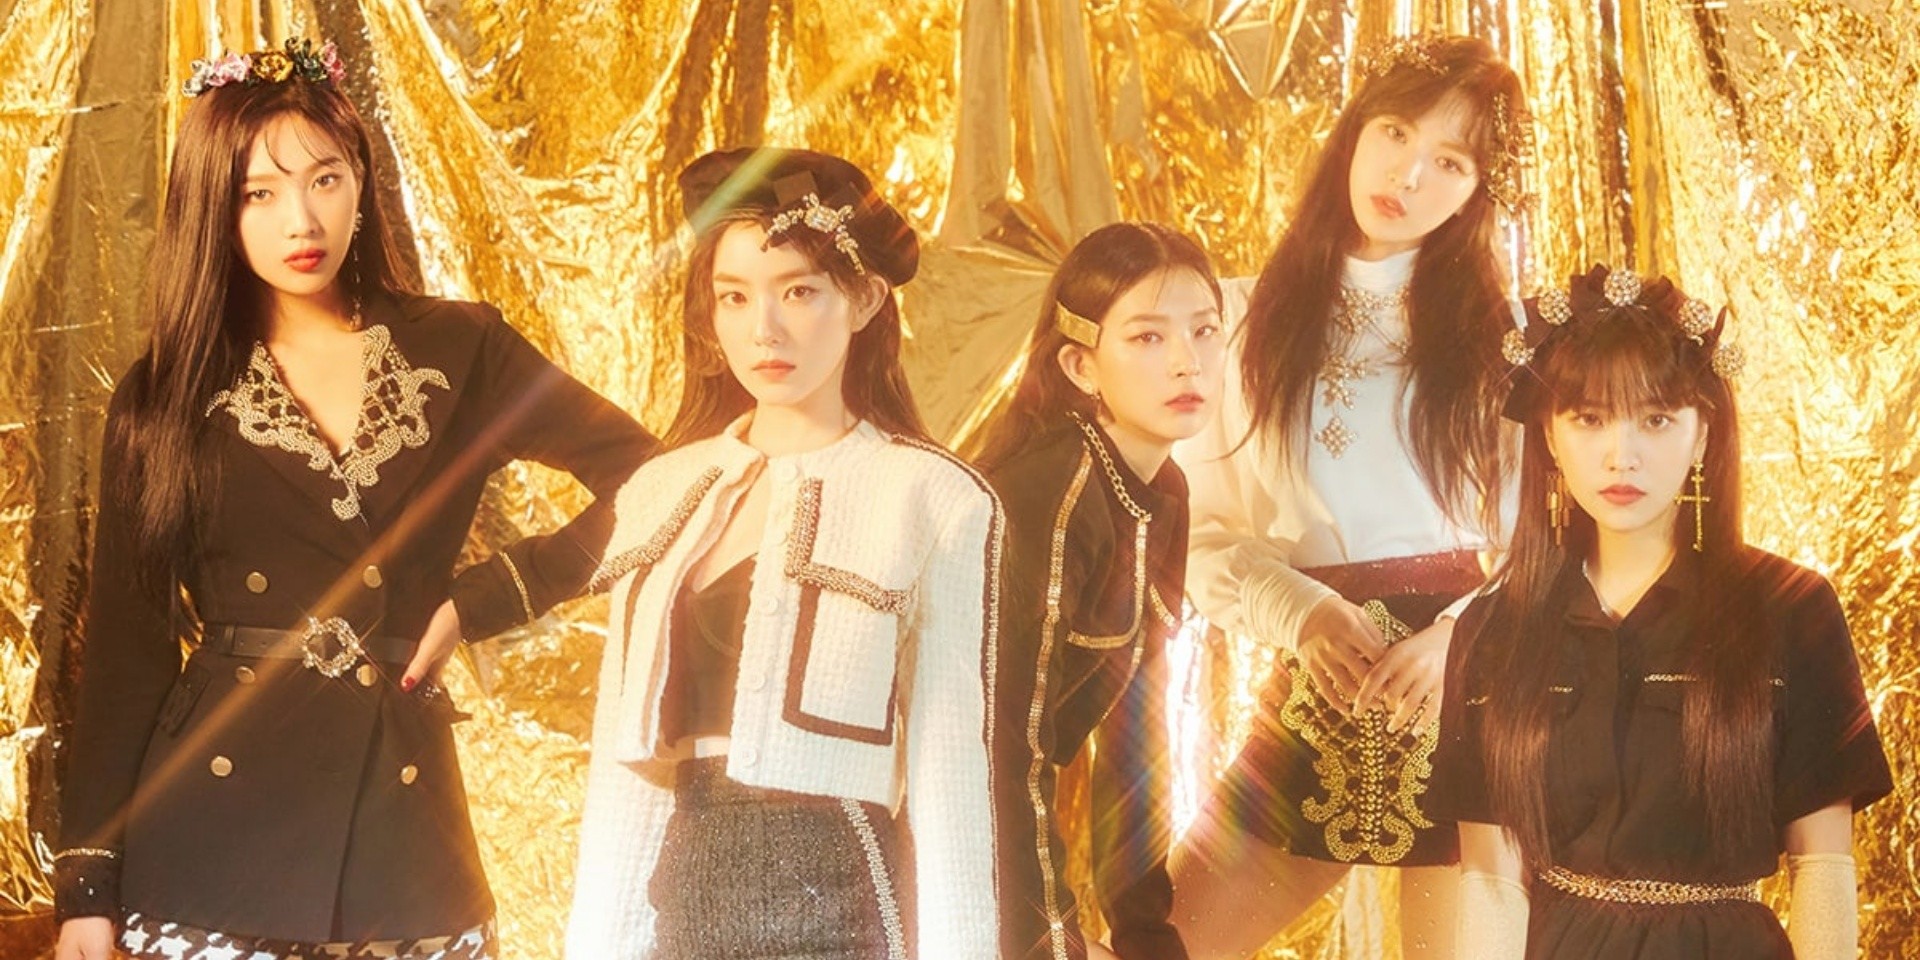 Red Velvet releases new EP along with music video for 'RBB (Really Bad Boy)' - listen